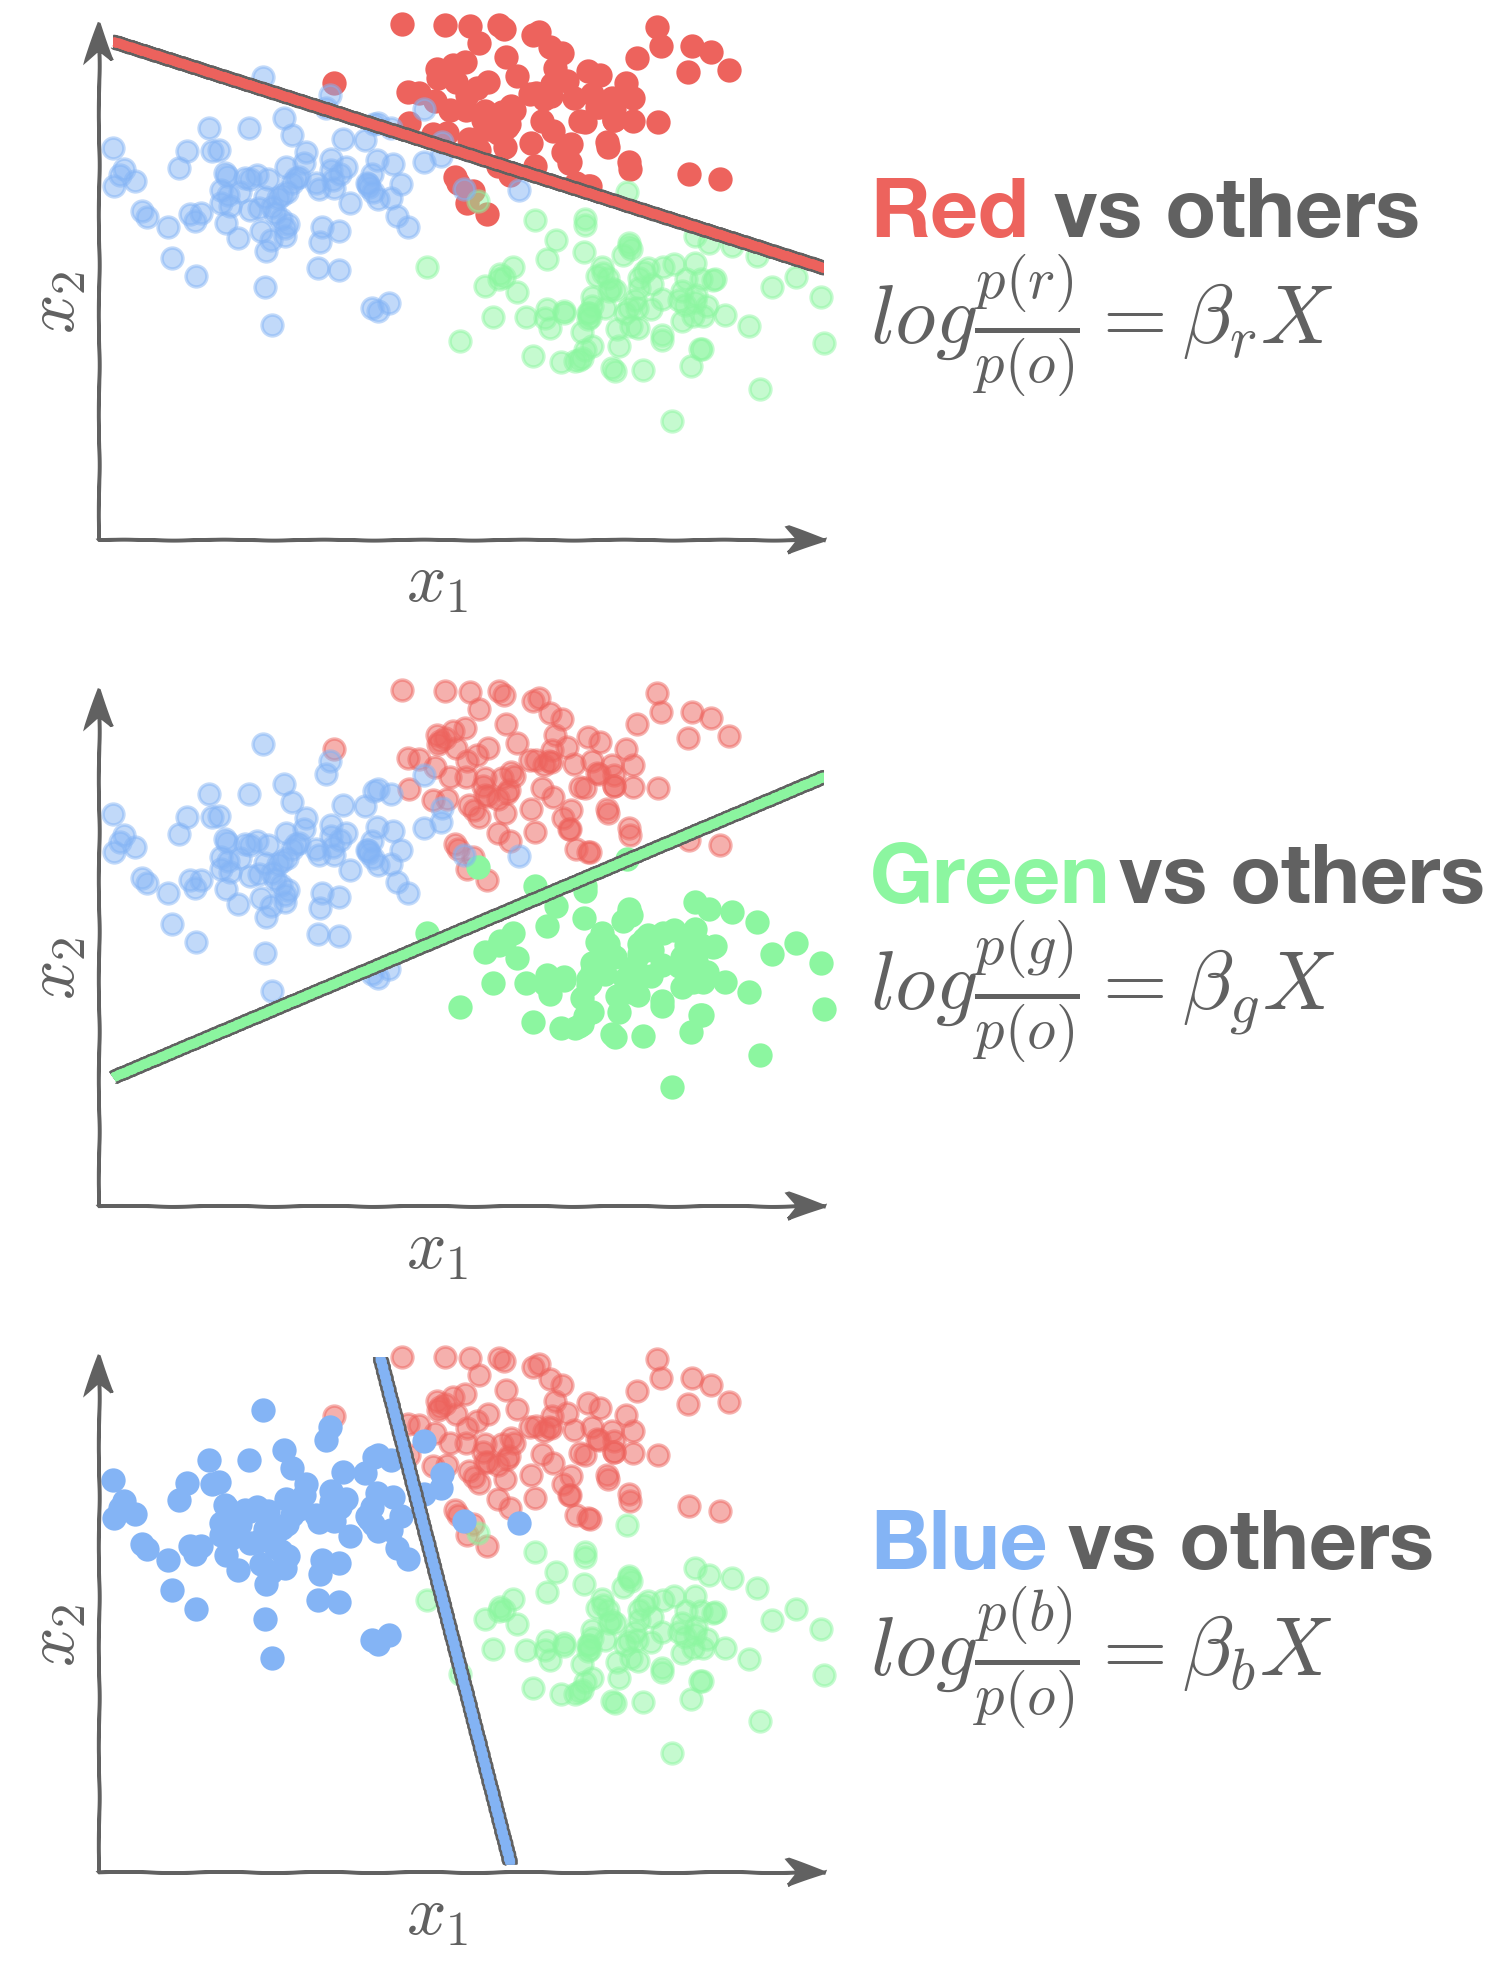 Three graphs like the one above are shown. In each one, a line is drawn separating most of the data points of one color from the other two.